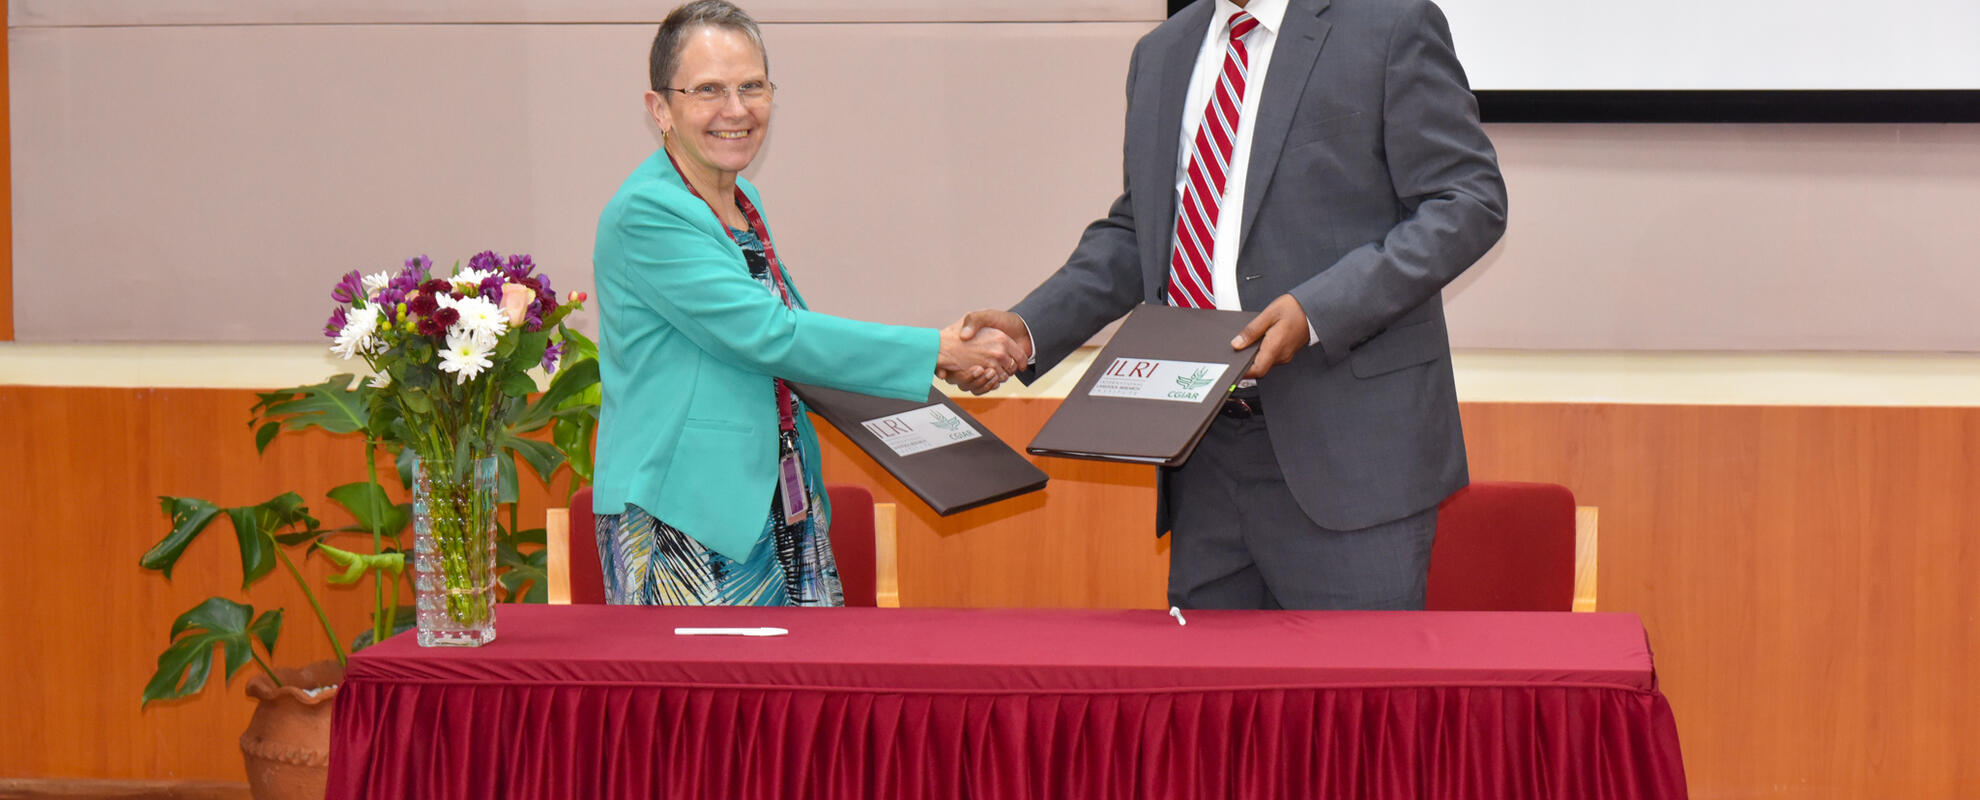 Advancing Somalia's Livestock Sector Together: ILRI signs an MoU with the Government of Somalia’s Ministry of Livestock, Forestry and Range